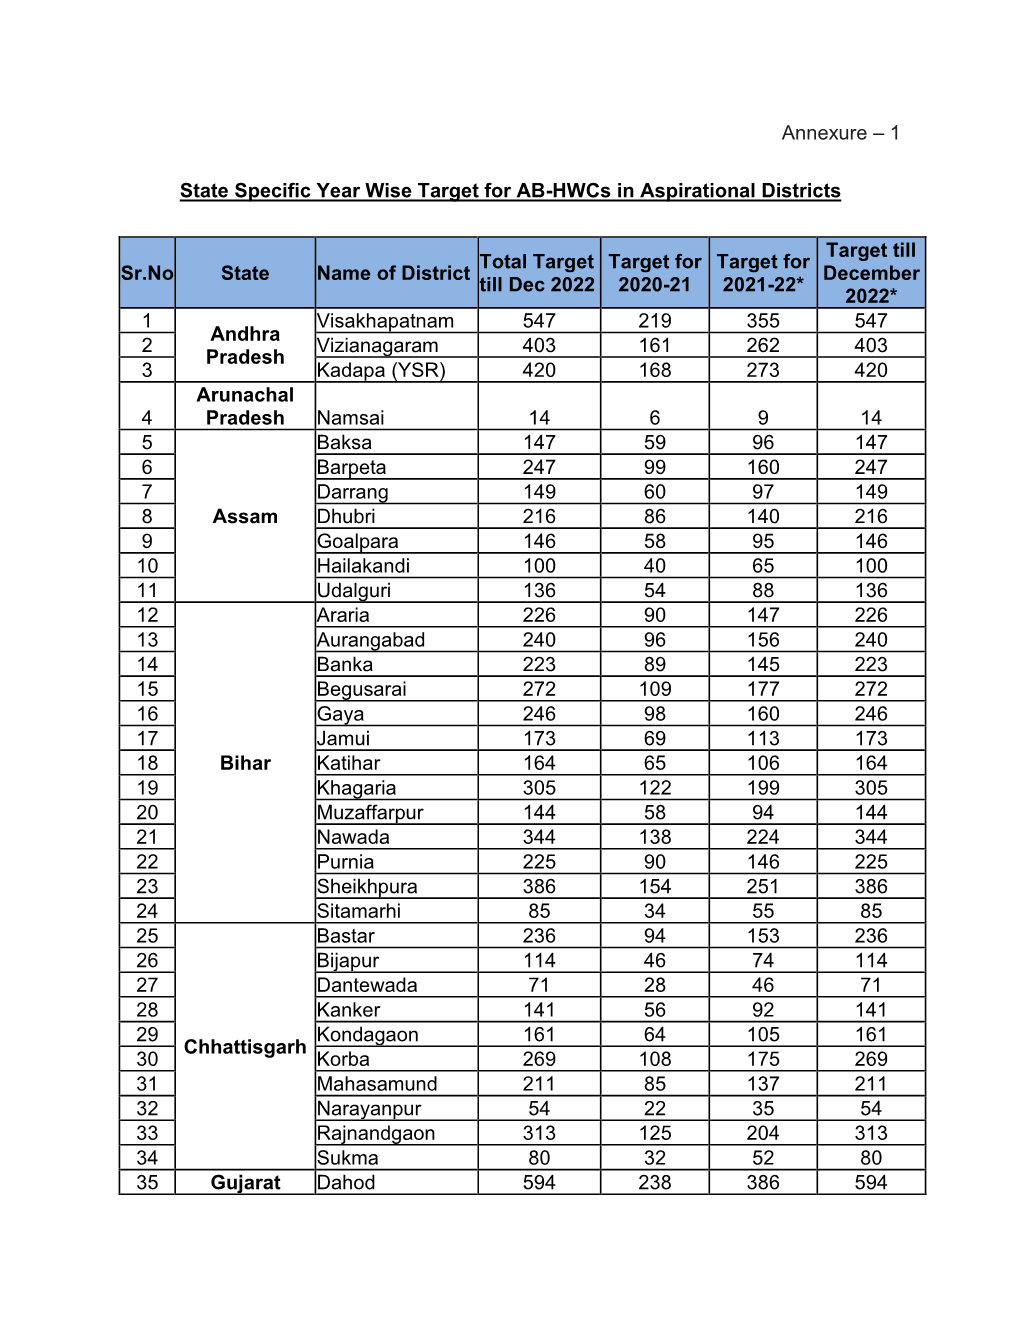 Annexure – 1 State Specific Year Wise Target for AB-Hwcs In